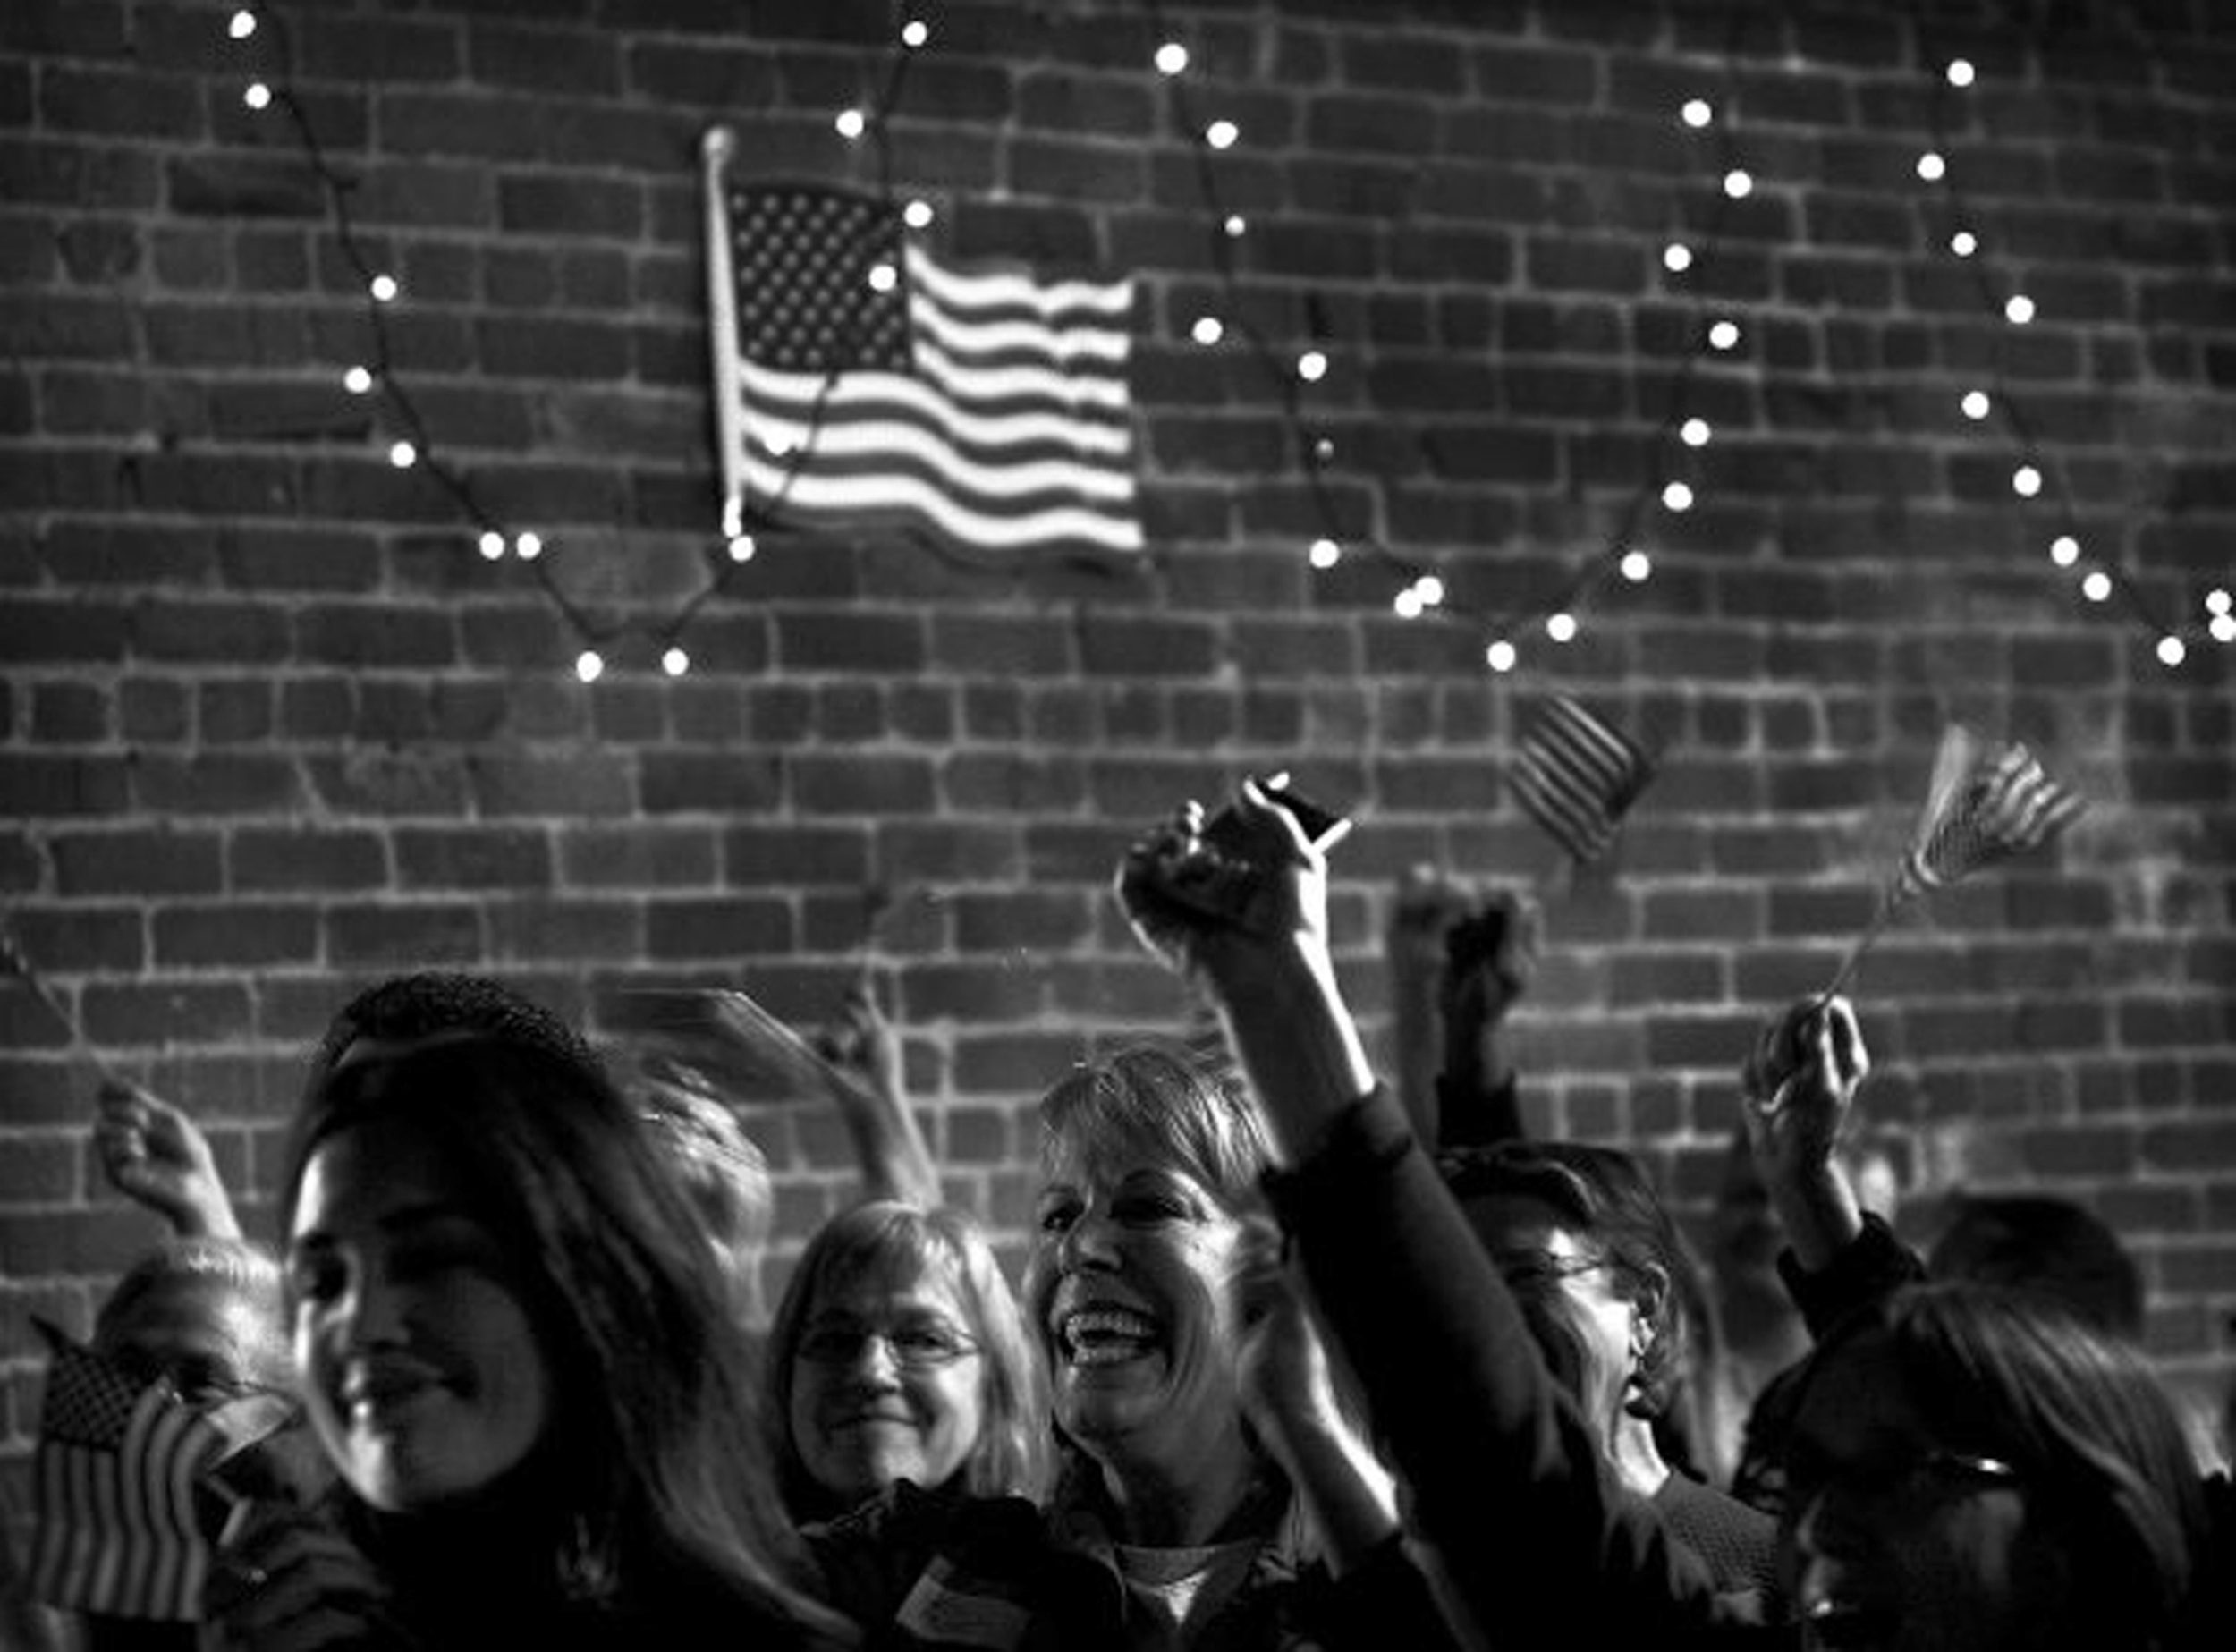 Celebration of Obama supporters after the election in Oakland, CA, November 2008.  